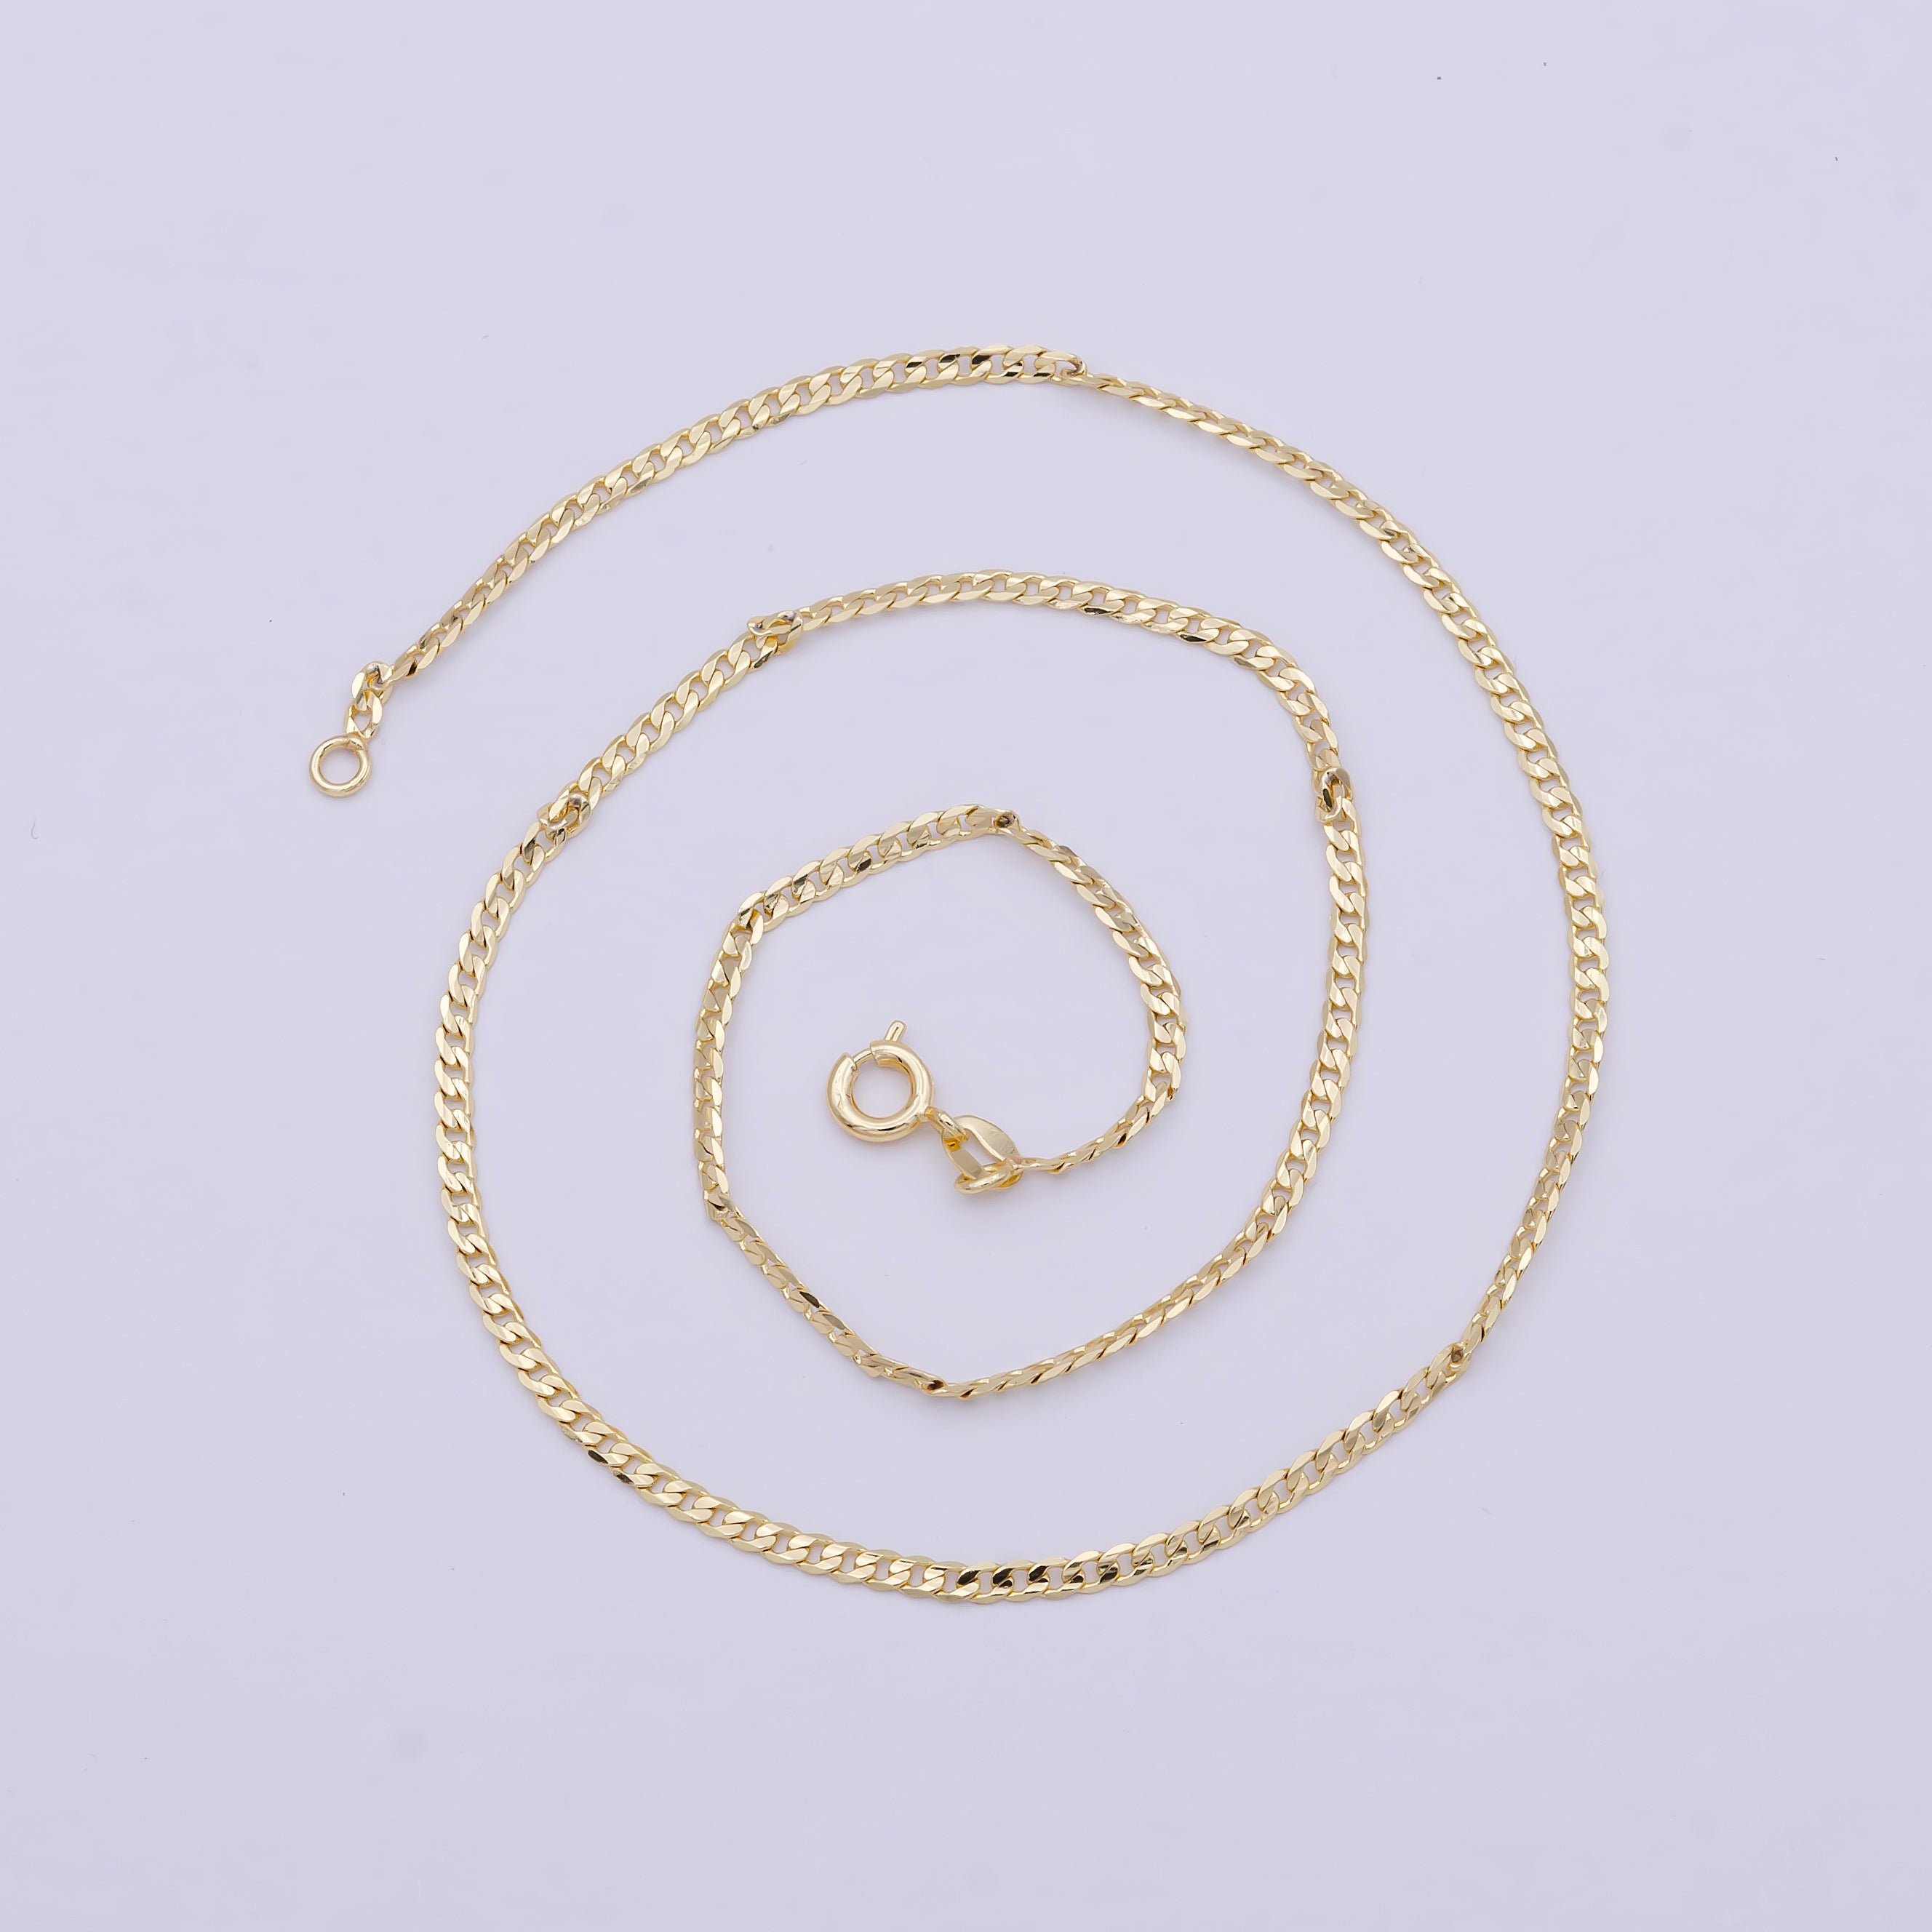 18K Gold Filled Curb Chain Necklace, 17.2 Inch Curb Chain Necklace, Dainty 2.2mm Link Necklace w/ Spring Clasp | WA-834 - DLUXCA